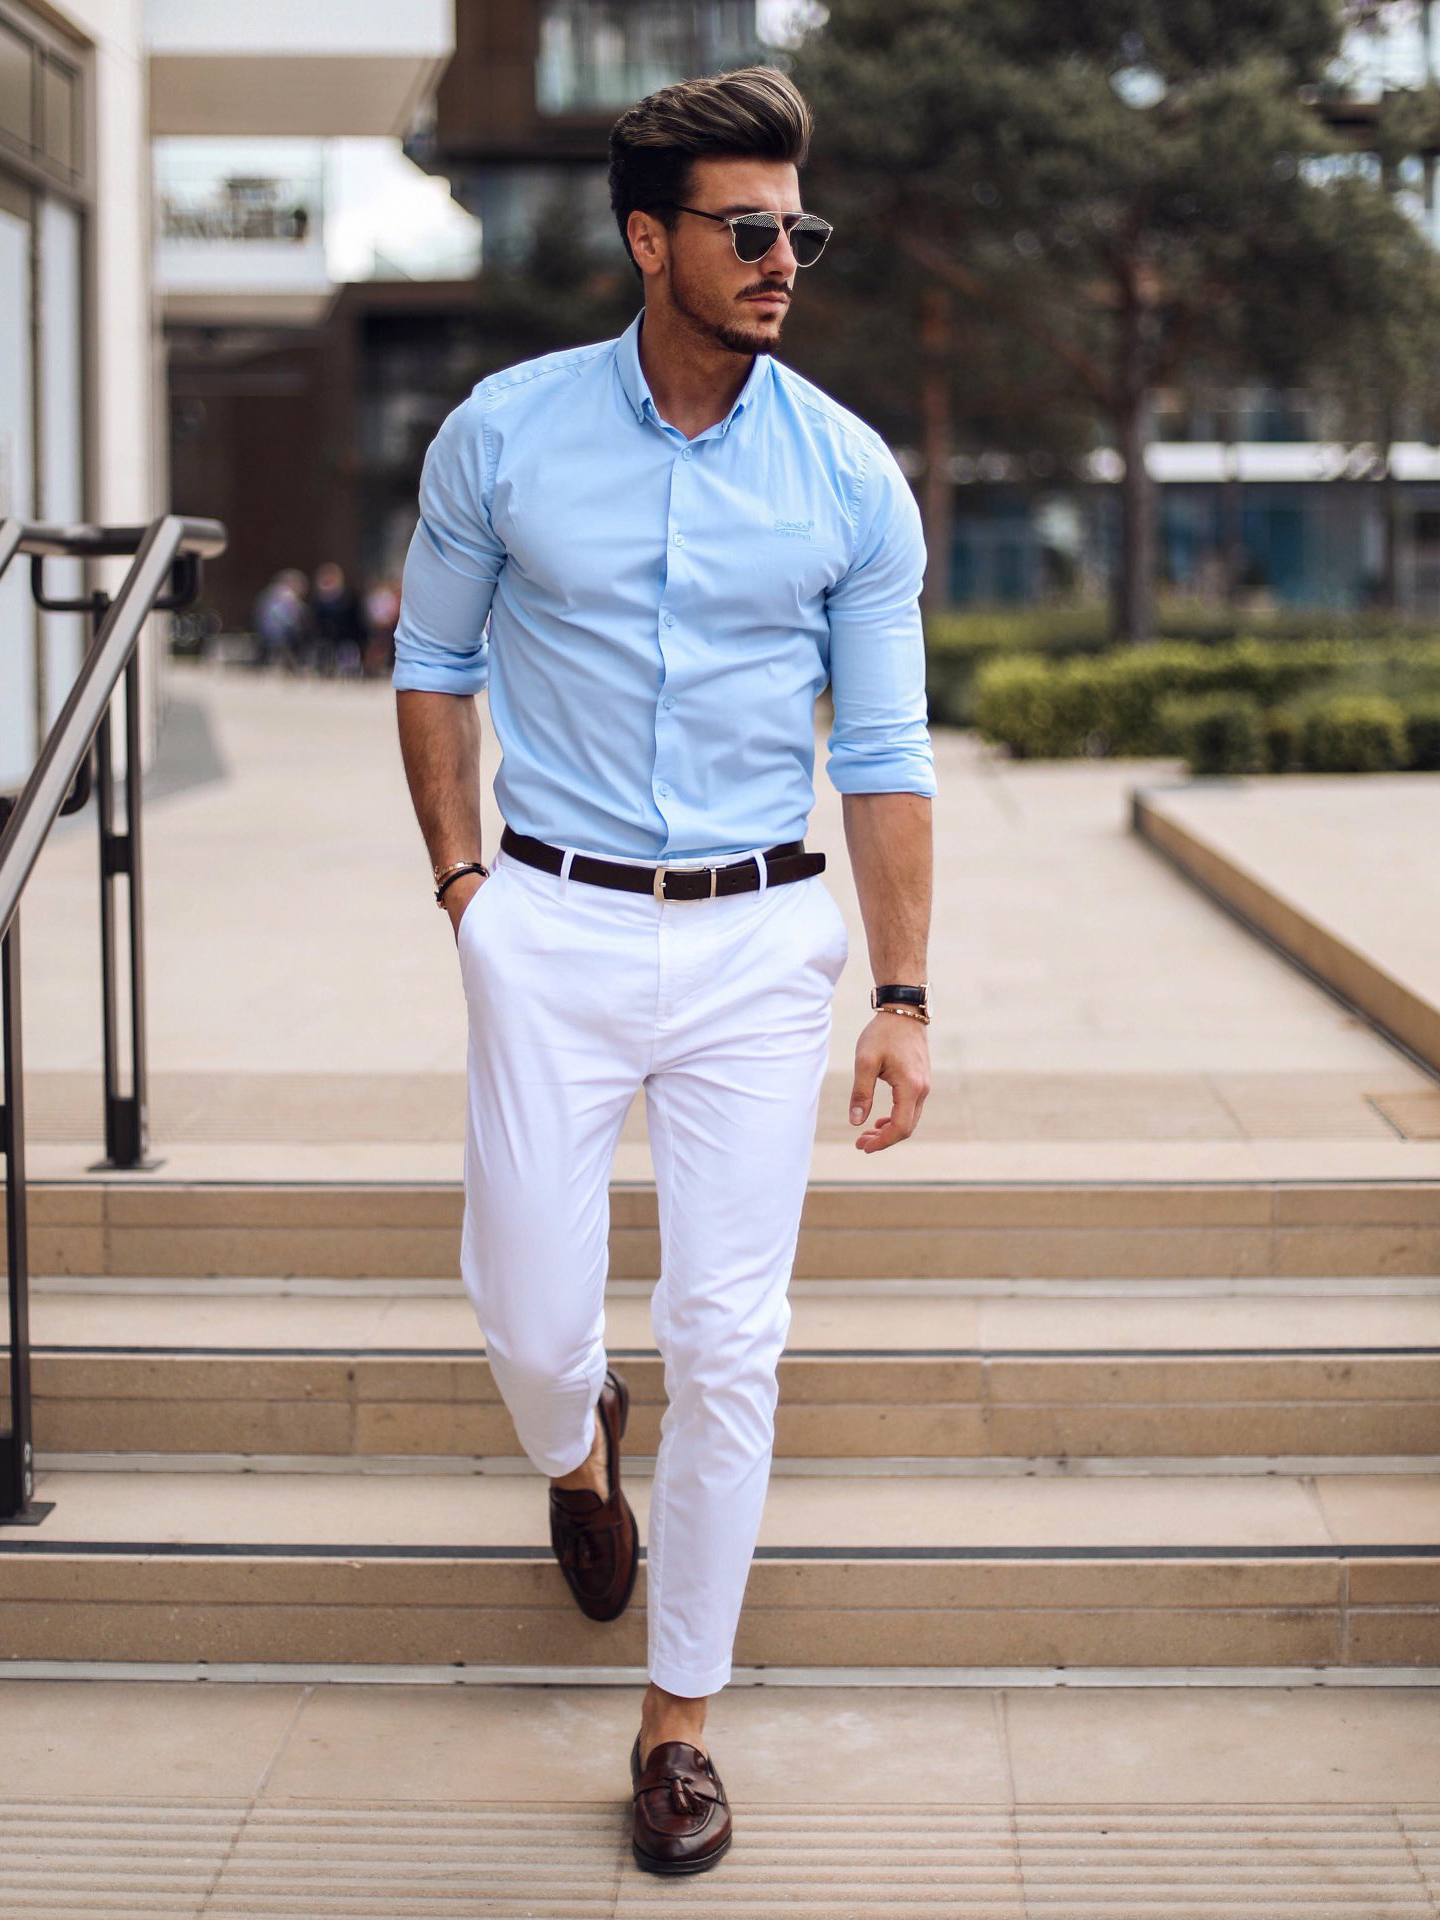 Light blue dress shirt, white pants, brown loafers, and brown belt